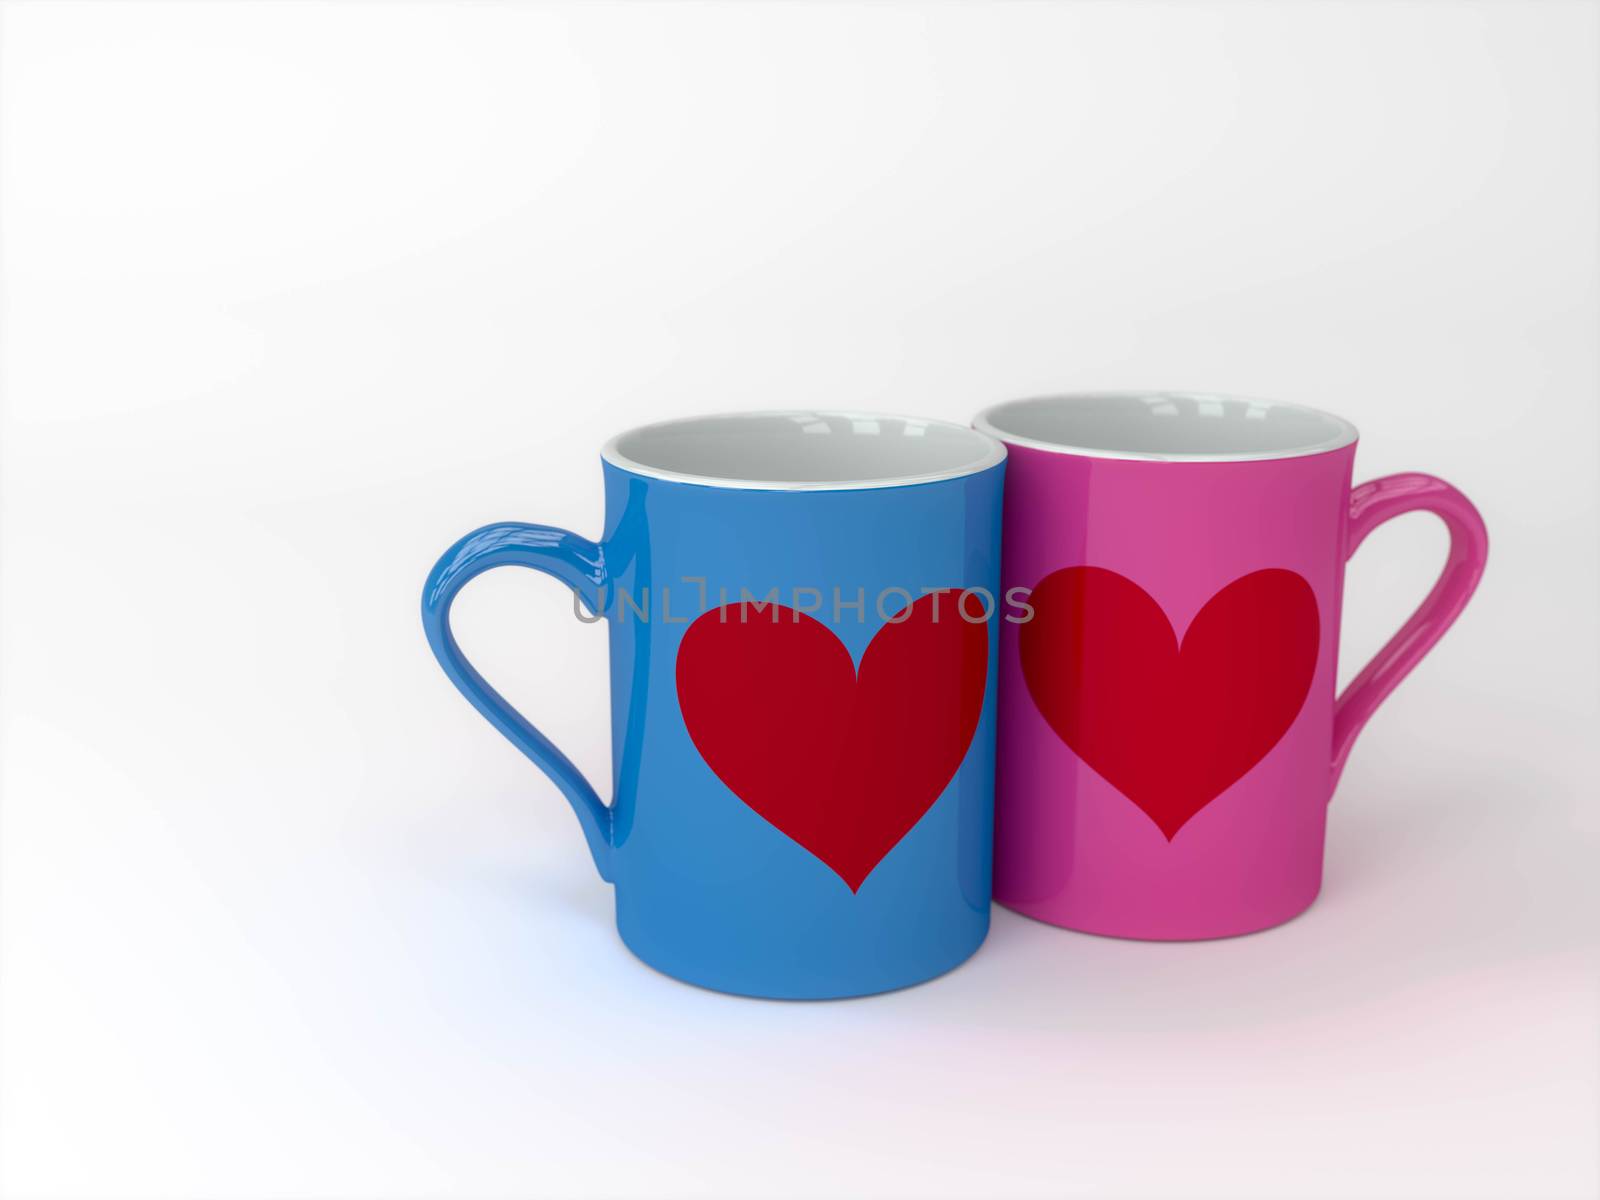 Couples' Mugs, Love couple coffee cups, 3DCG,3D rendering. 3D illustration. by Umbrella